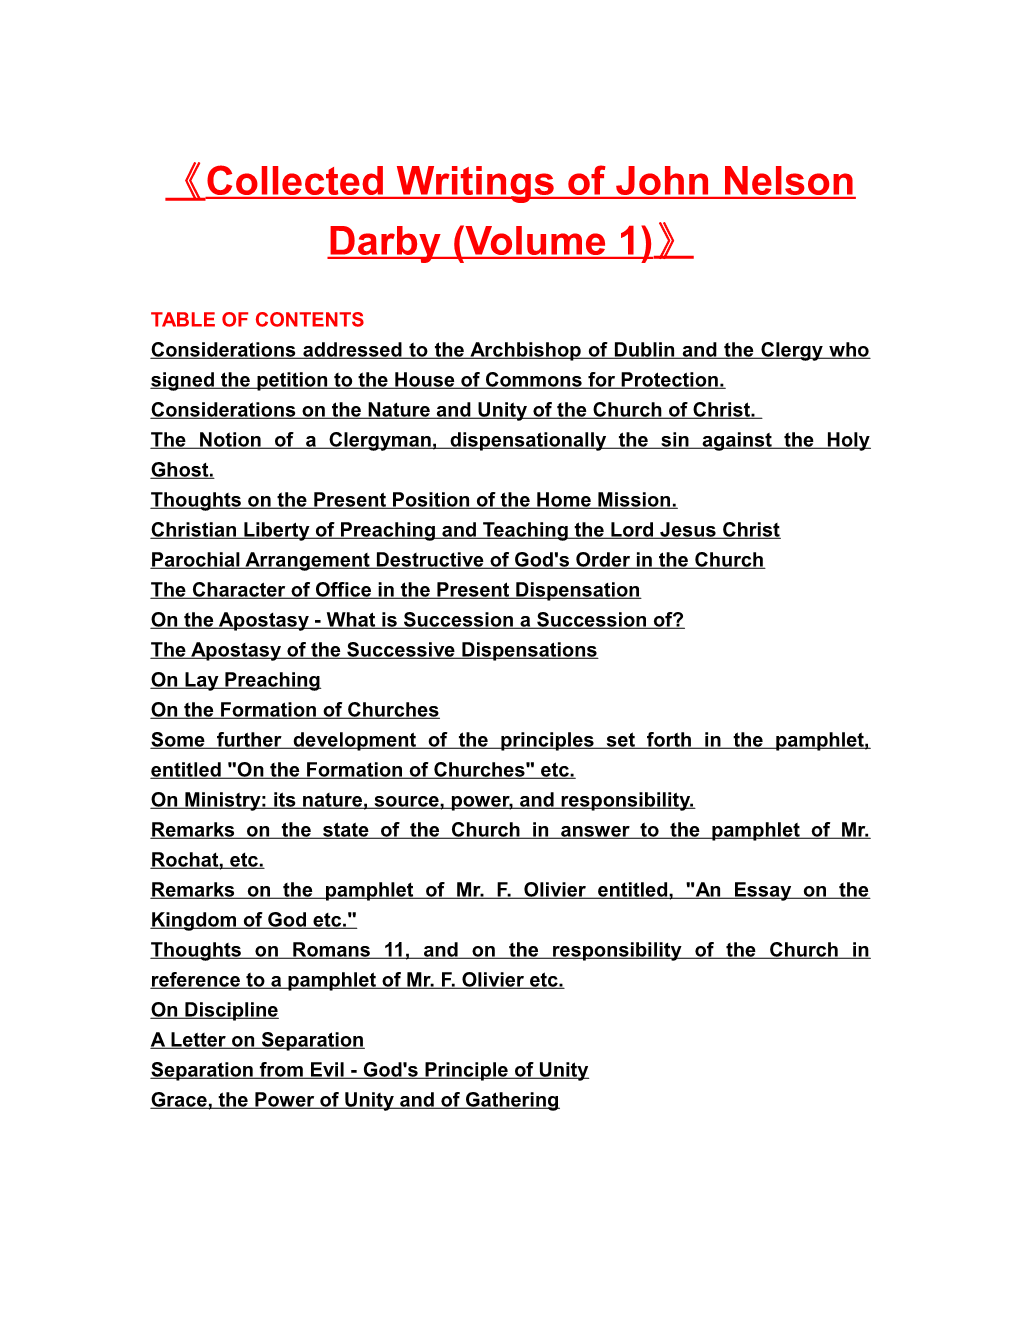 Collected Writings of John Nelson Darby (Volume 1)